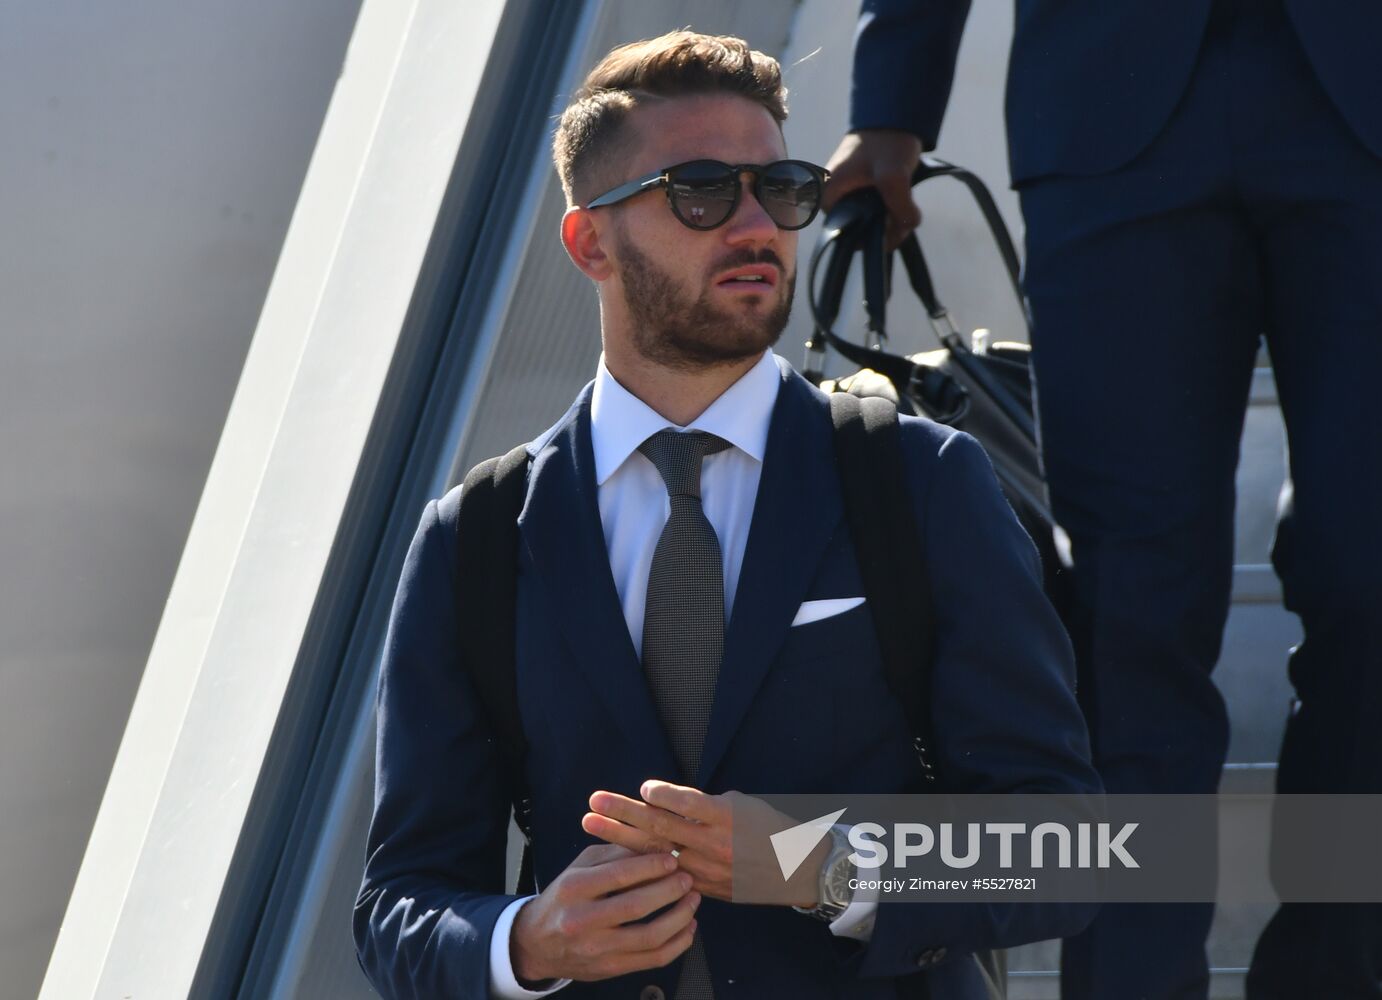 Russia World Cup Sweden Arrival